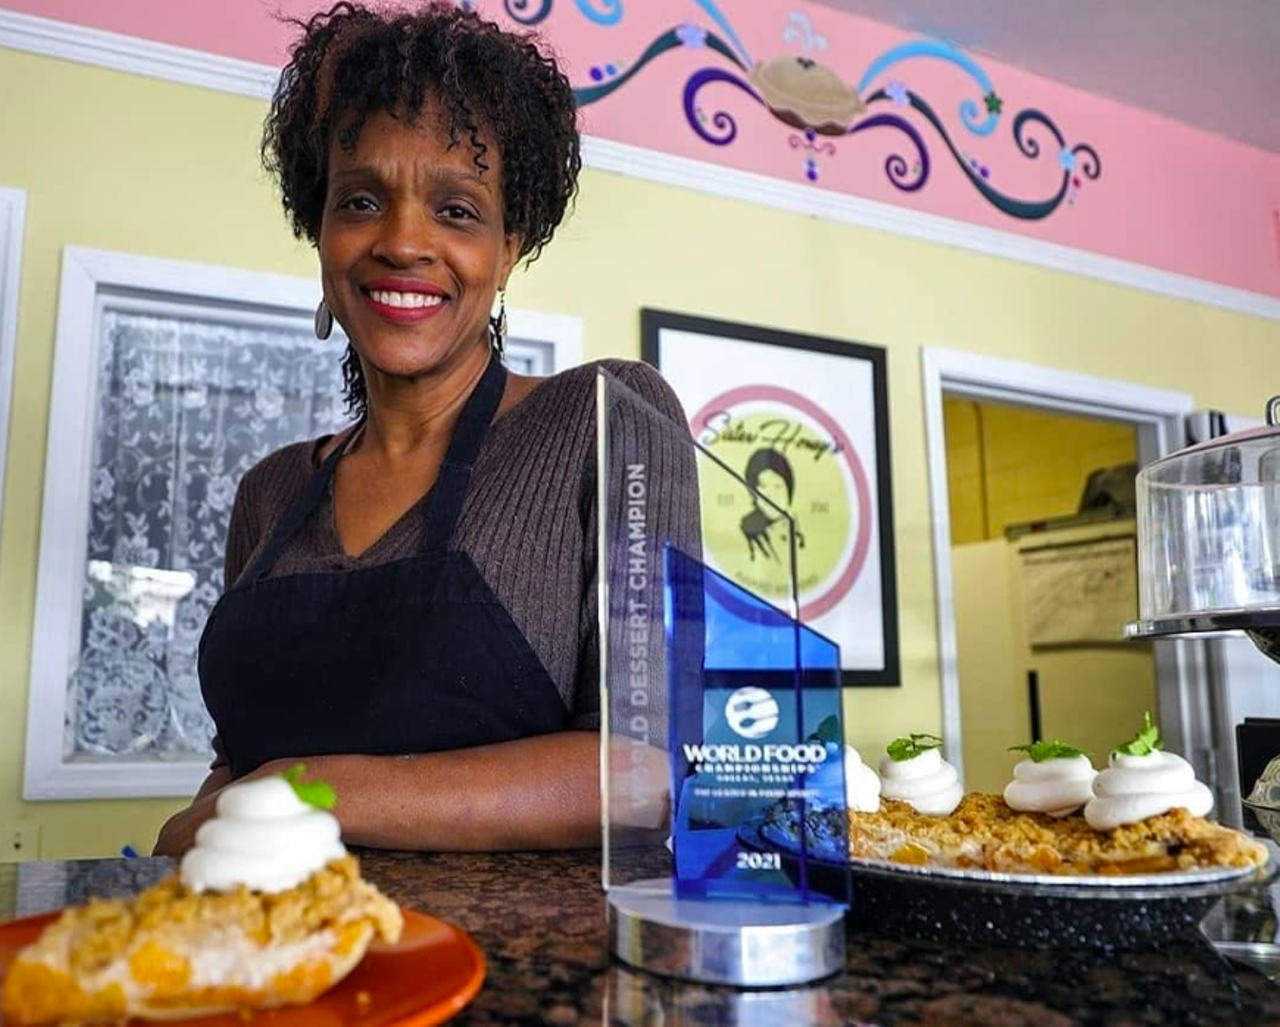 Sister Honey’s
247 E. Michigan St., Orlando
Sister Honey's offers up award-winning pies, cupcakes, pound cakes, cookies and more at this South Orlando bakery. Menu items and bakery options change daily, so call ahead if you're looking for something special.